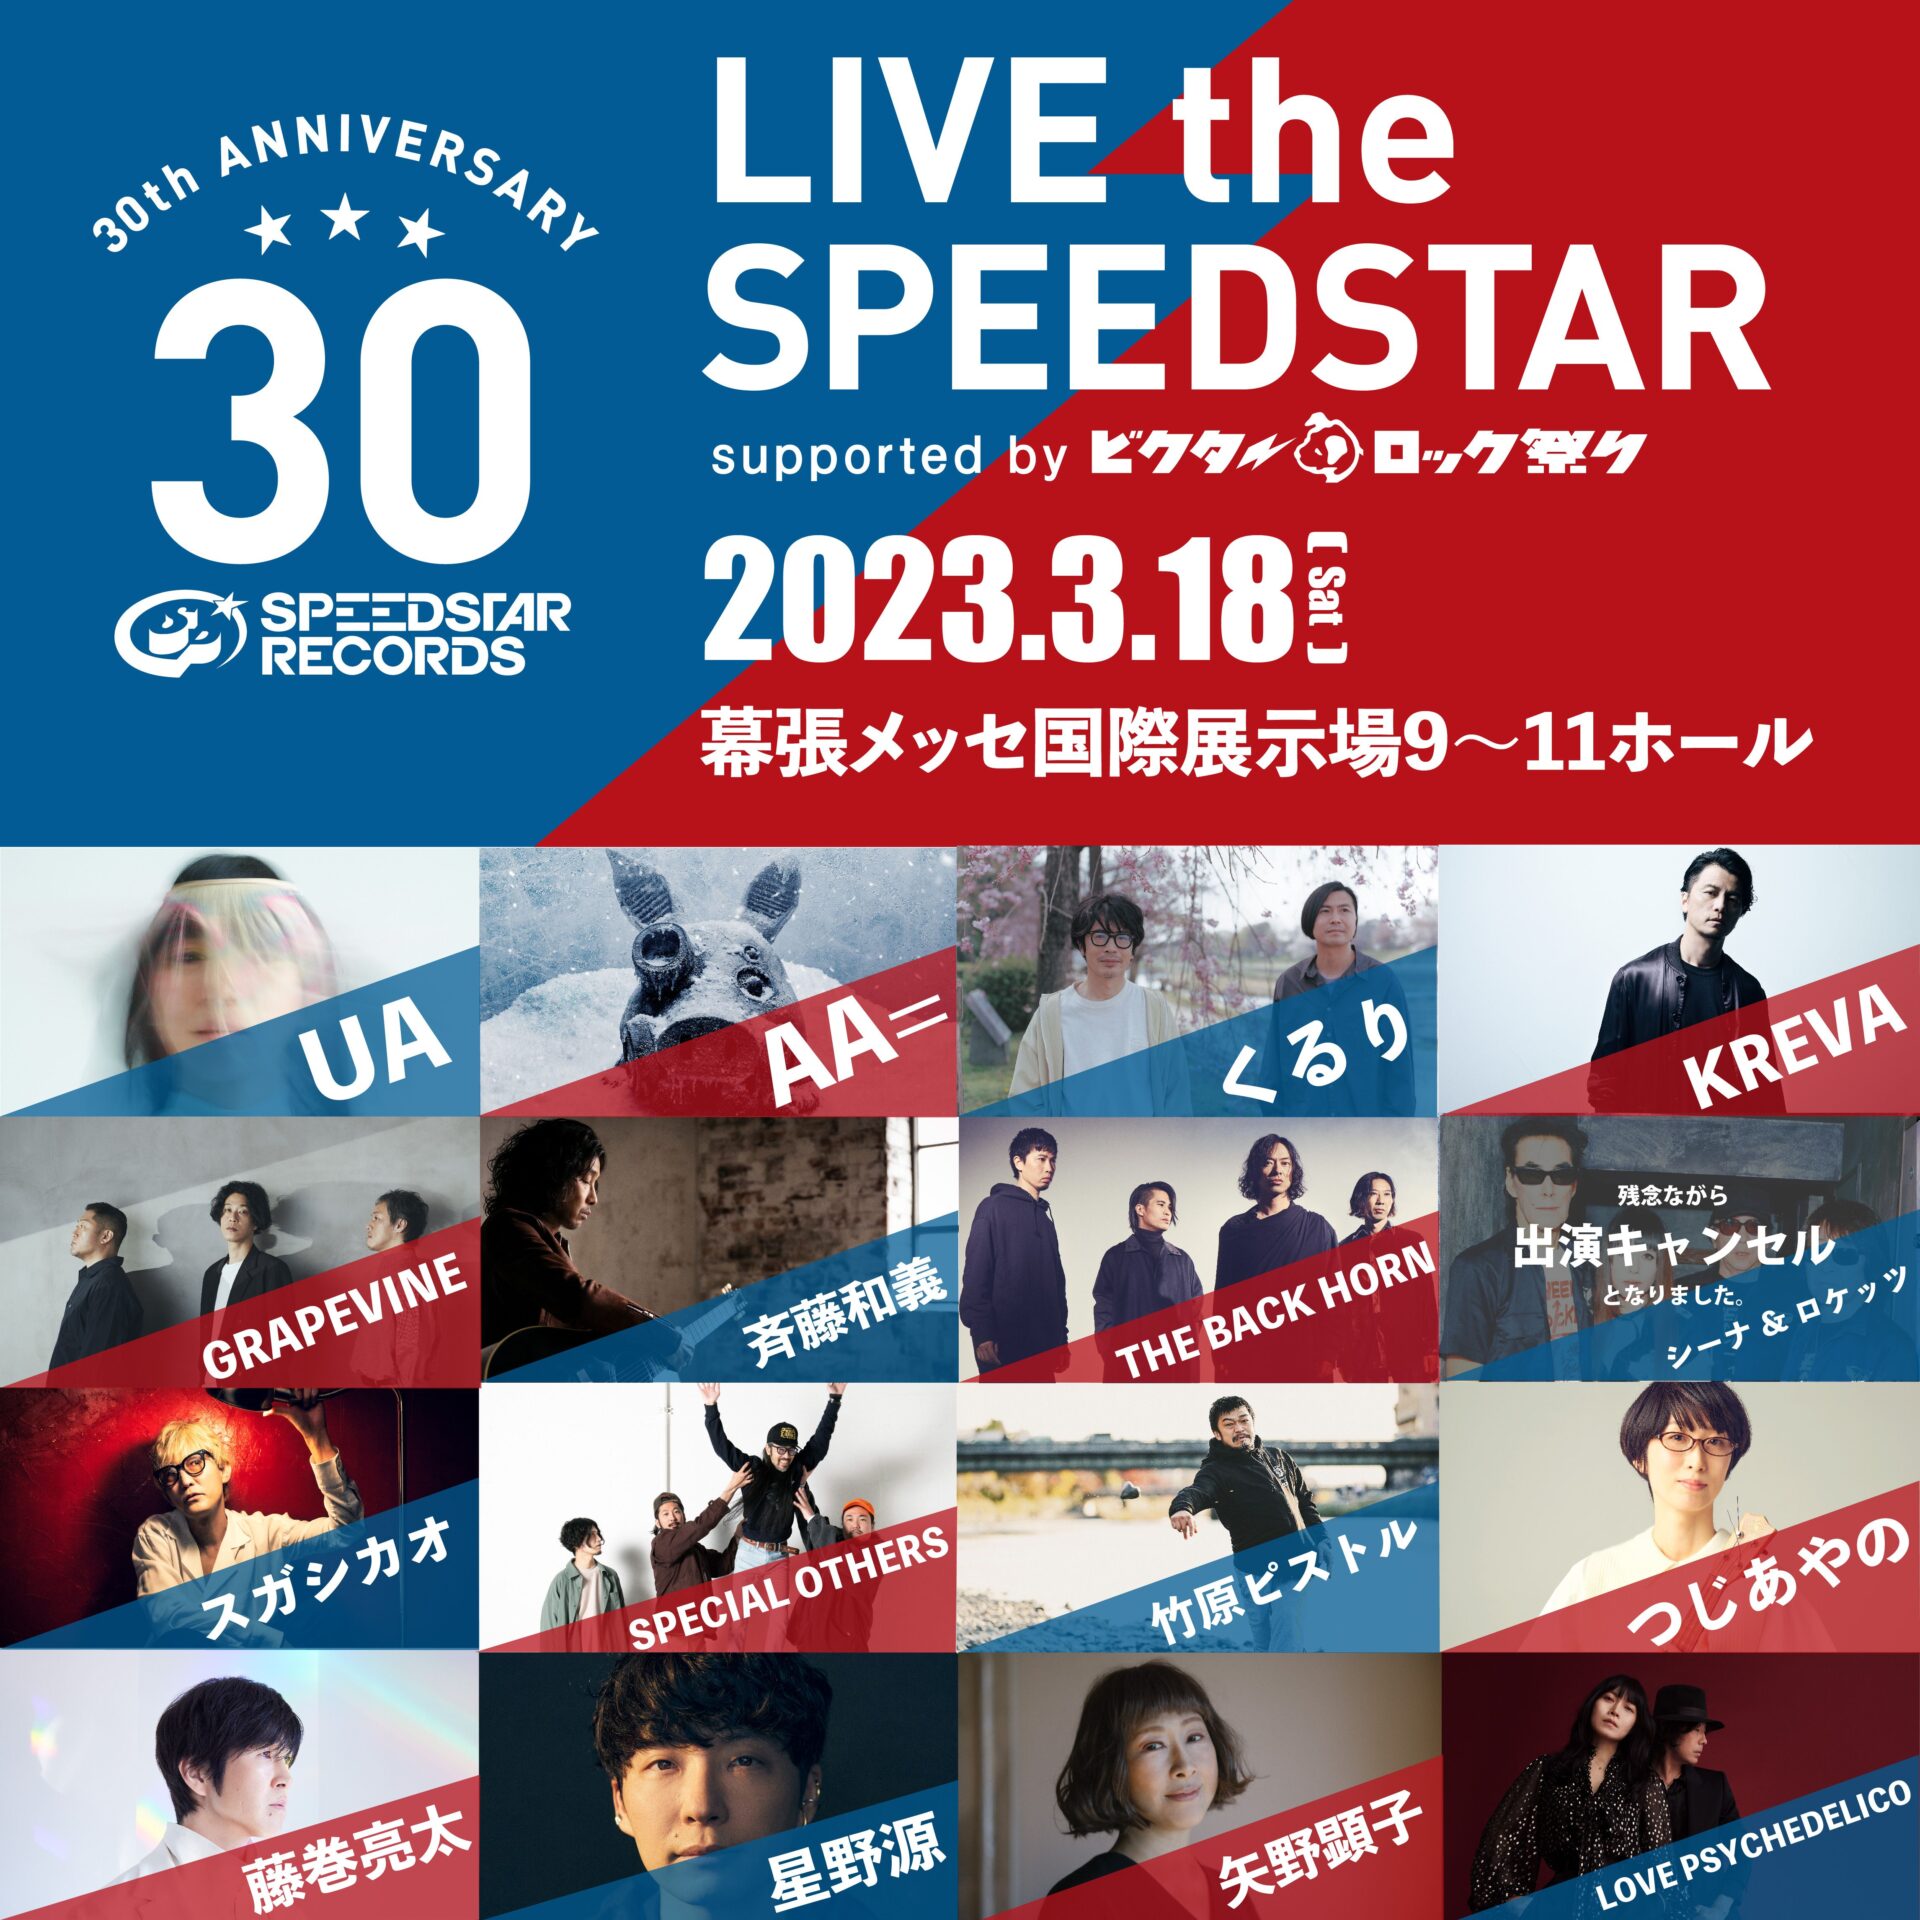 SPEEDSTAR RECORDS 30th Anniversary 「LIVE the SPEEDSTAR」supported by ビクターロック祭り